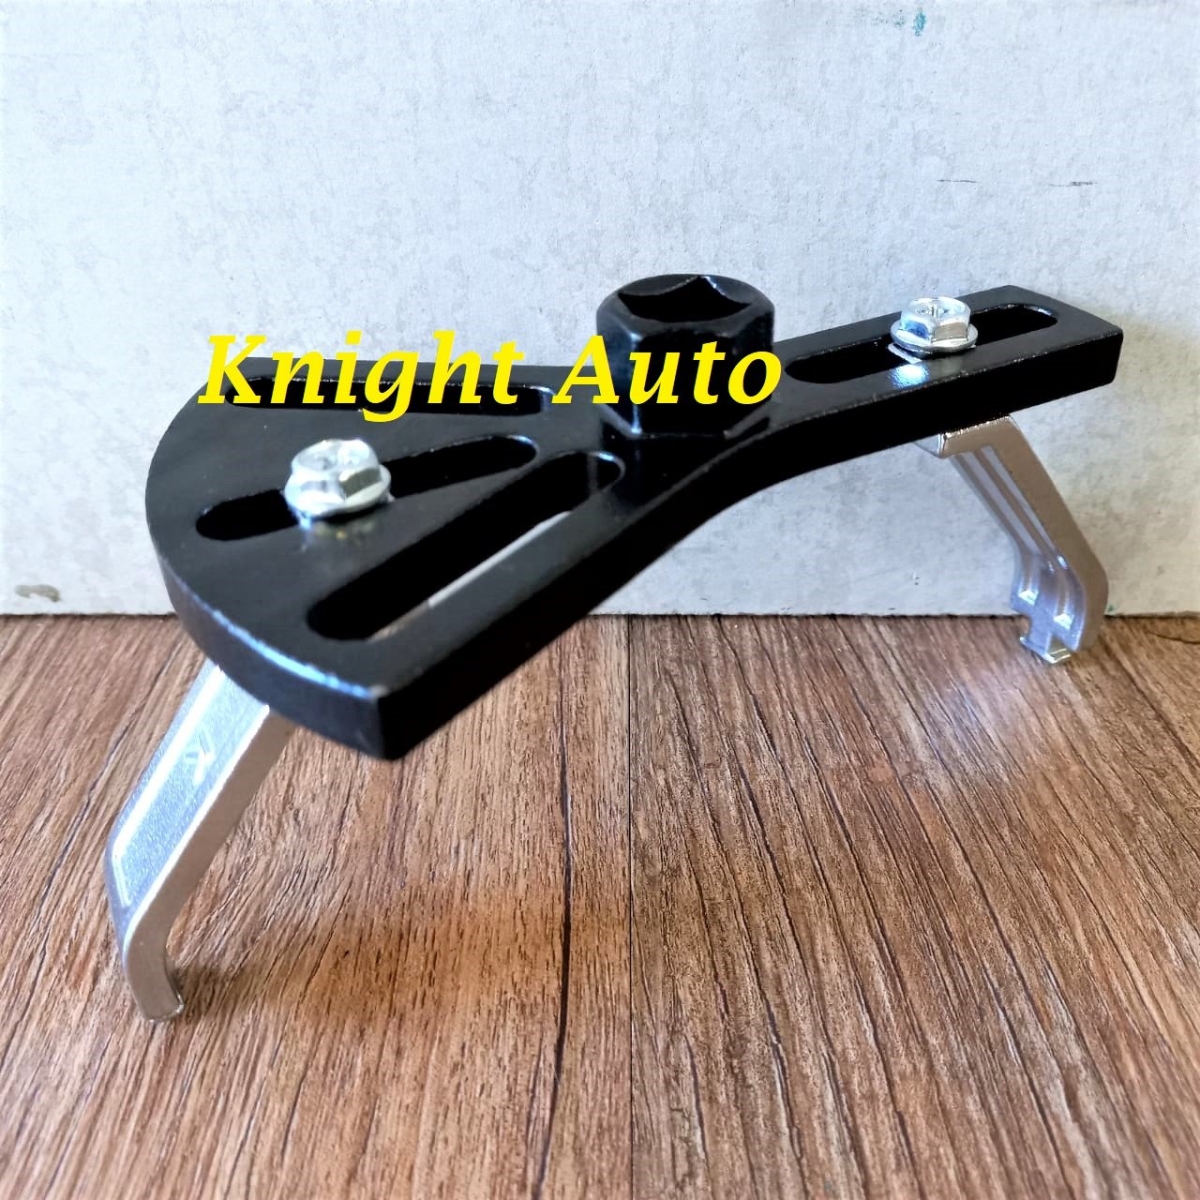 Fuel Pump Removal Tool Durable Chrome Tangsten Steel Fuel Tank Lid Wrench  Anti Slip Adjustable High Strength 3 Legs for Car - AliExpress